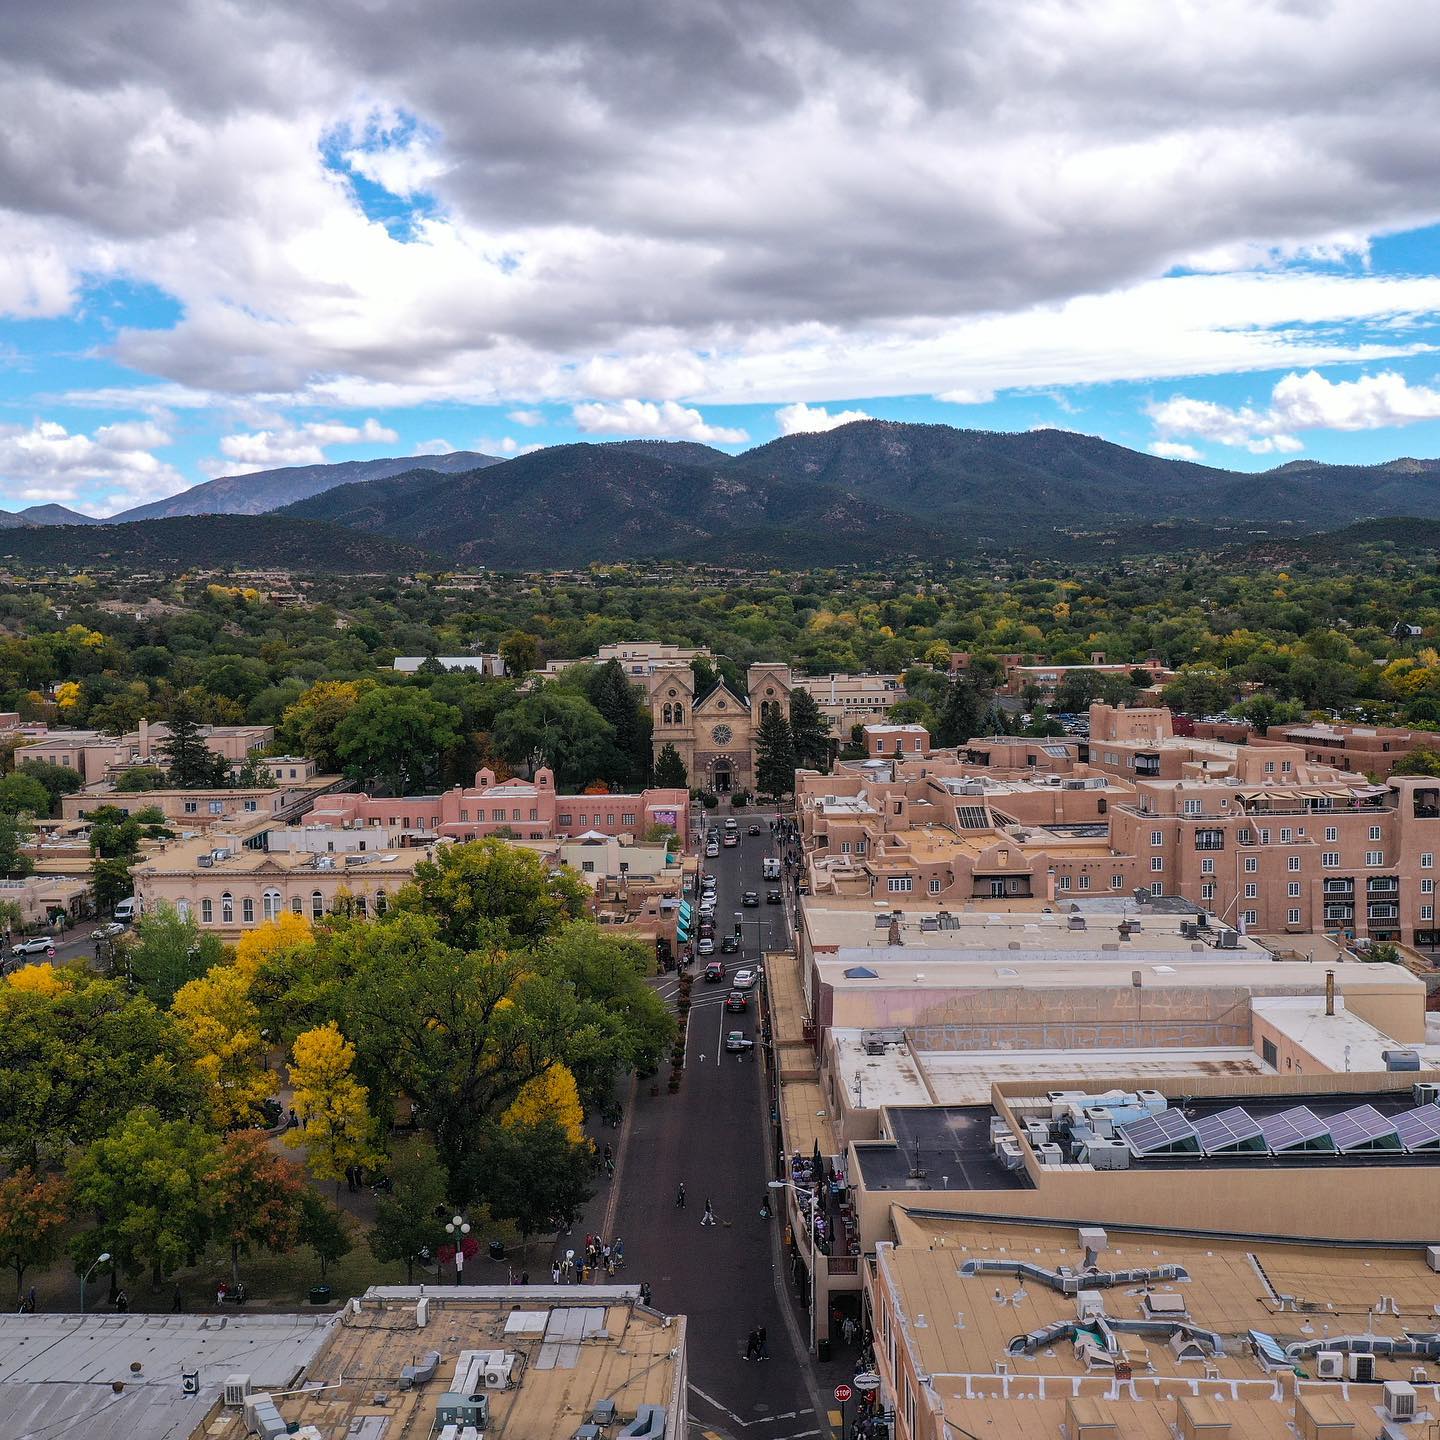 Skyline view of Santa Fe, NM. Photo by @perrydapenguin